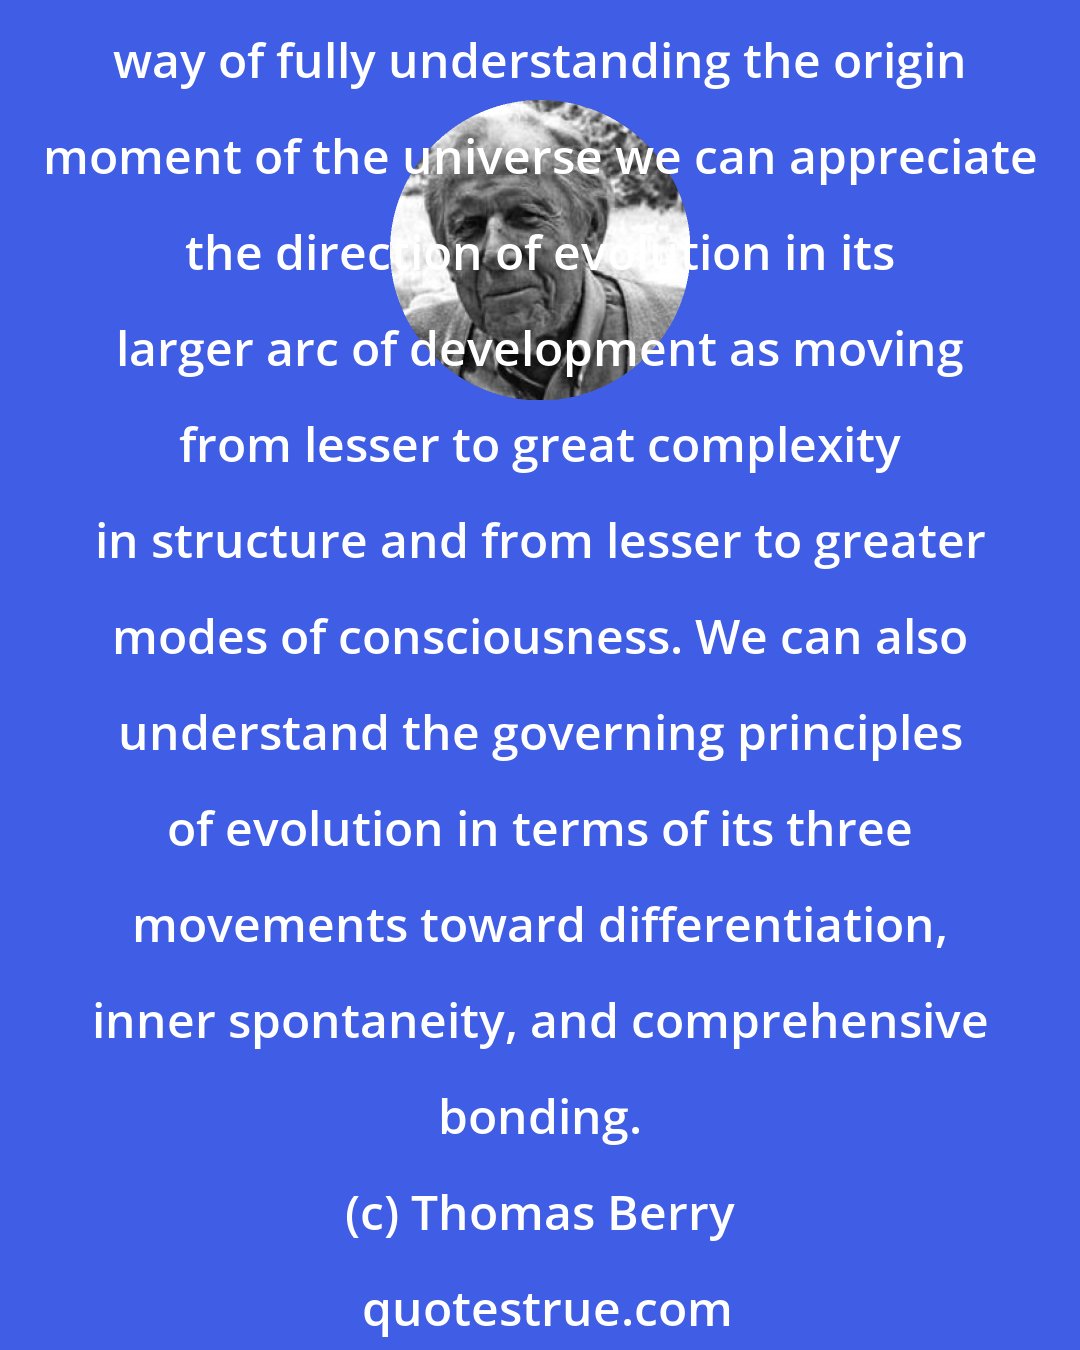 Thomas Berry: We need merely understand that the evolutionary process is neither random nor determined but creative. It follows the general pattern of all creativity. While there is no way of fully understanding the origin moment of the universe we can appreciate the direction of evolution in its larger arc of development as moving from lesser to great complexity in structure and from lesser to greater modes of consciousness. We can also understand the governing principles of evolution in terms of its three movements toward differentiation, inner spontaneity, and comprehensive bonding.